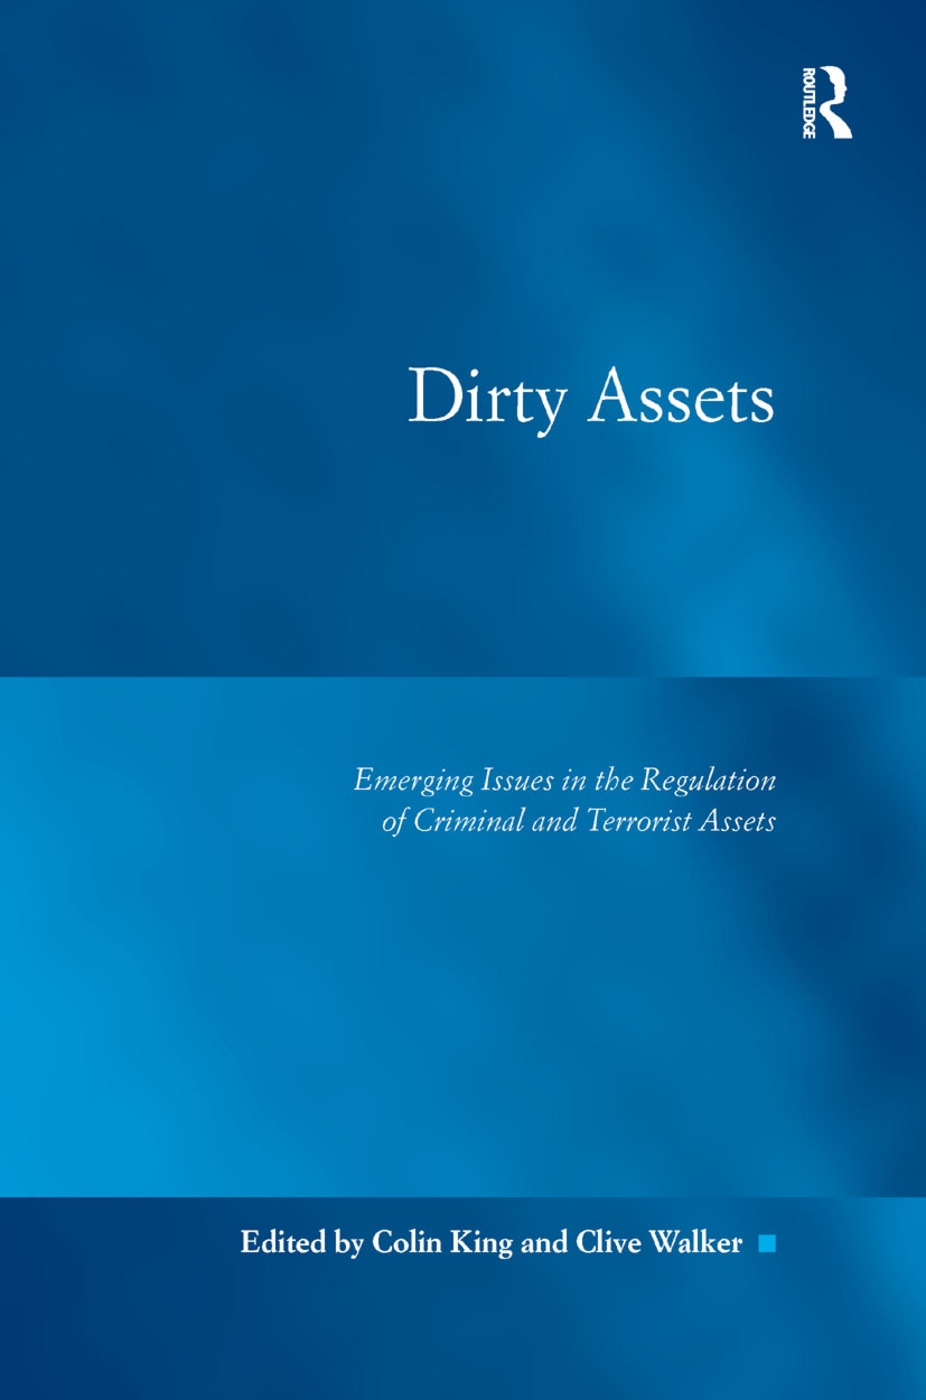 Dirty Assets: Emerging Issues in the Regulation of Criminal and Terrorist Assets. by Colin King and Clive Walker